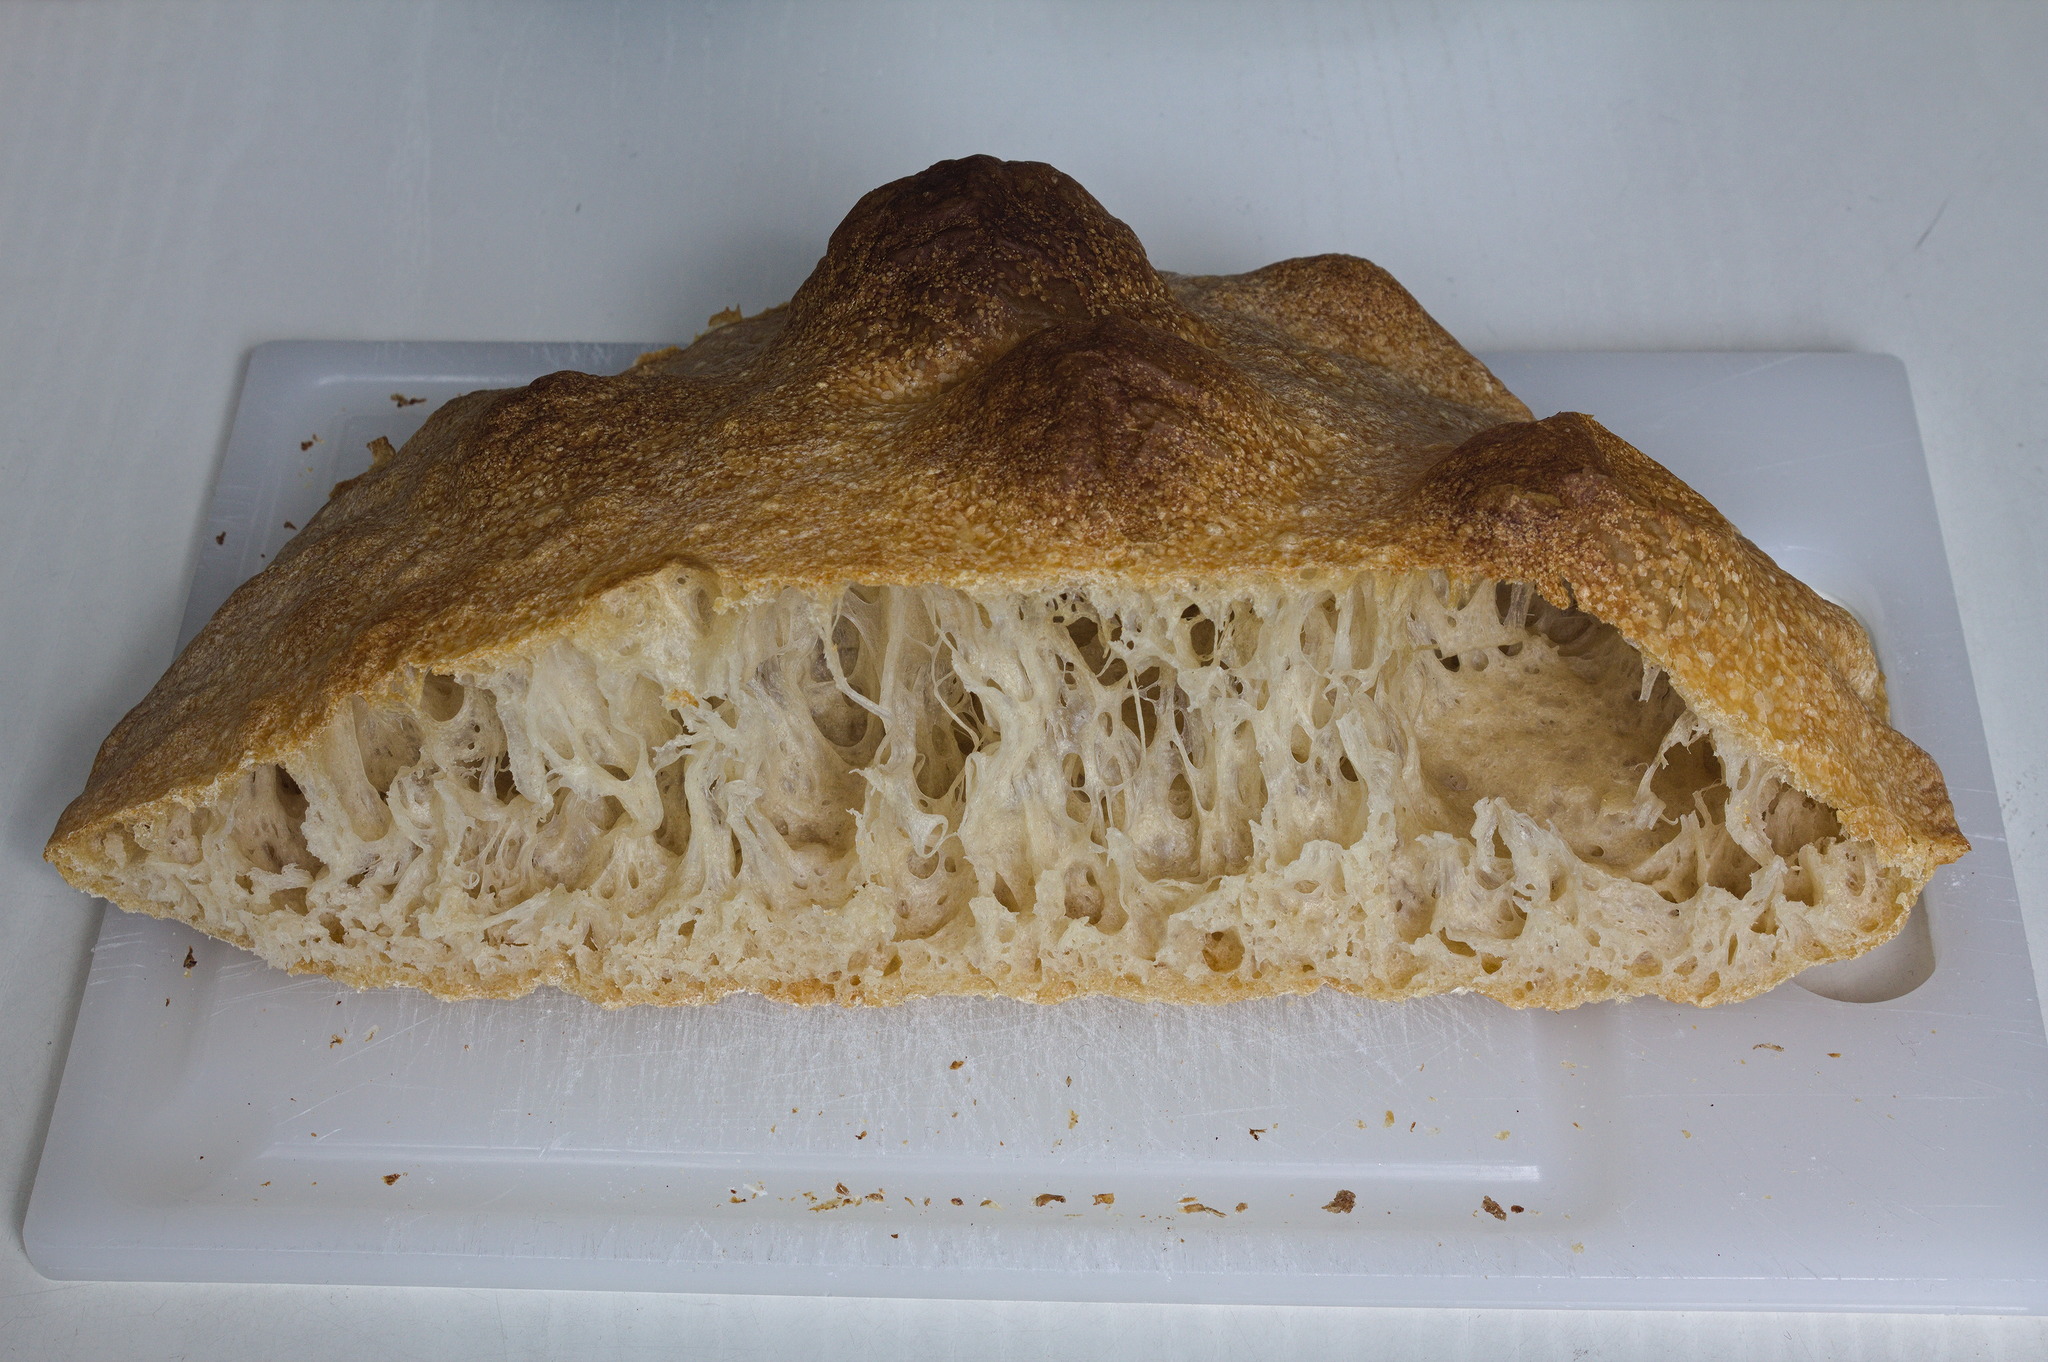 the loaf cut in half, to show thin stripes of crumb from the
high hydration.